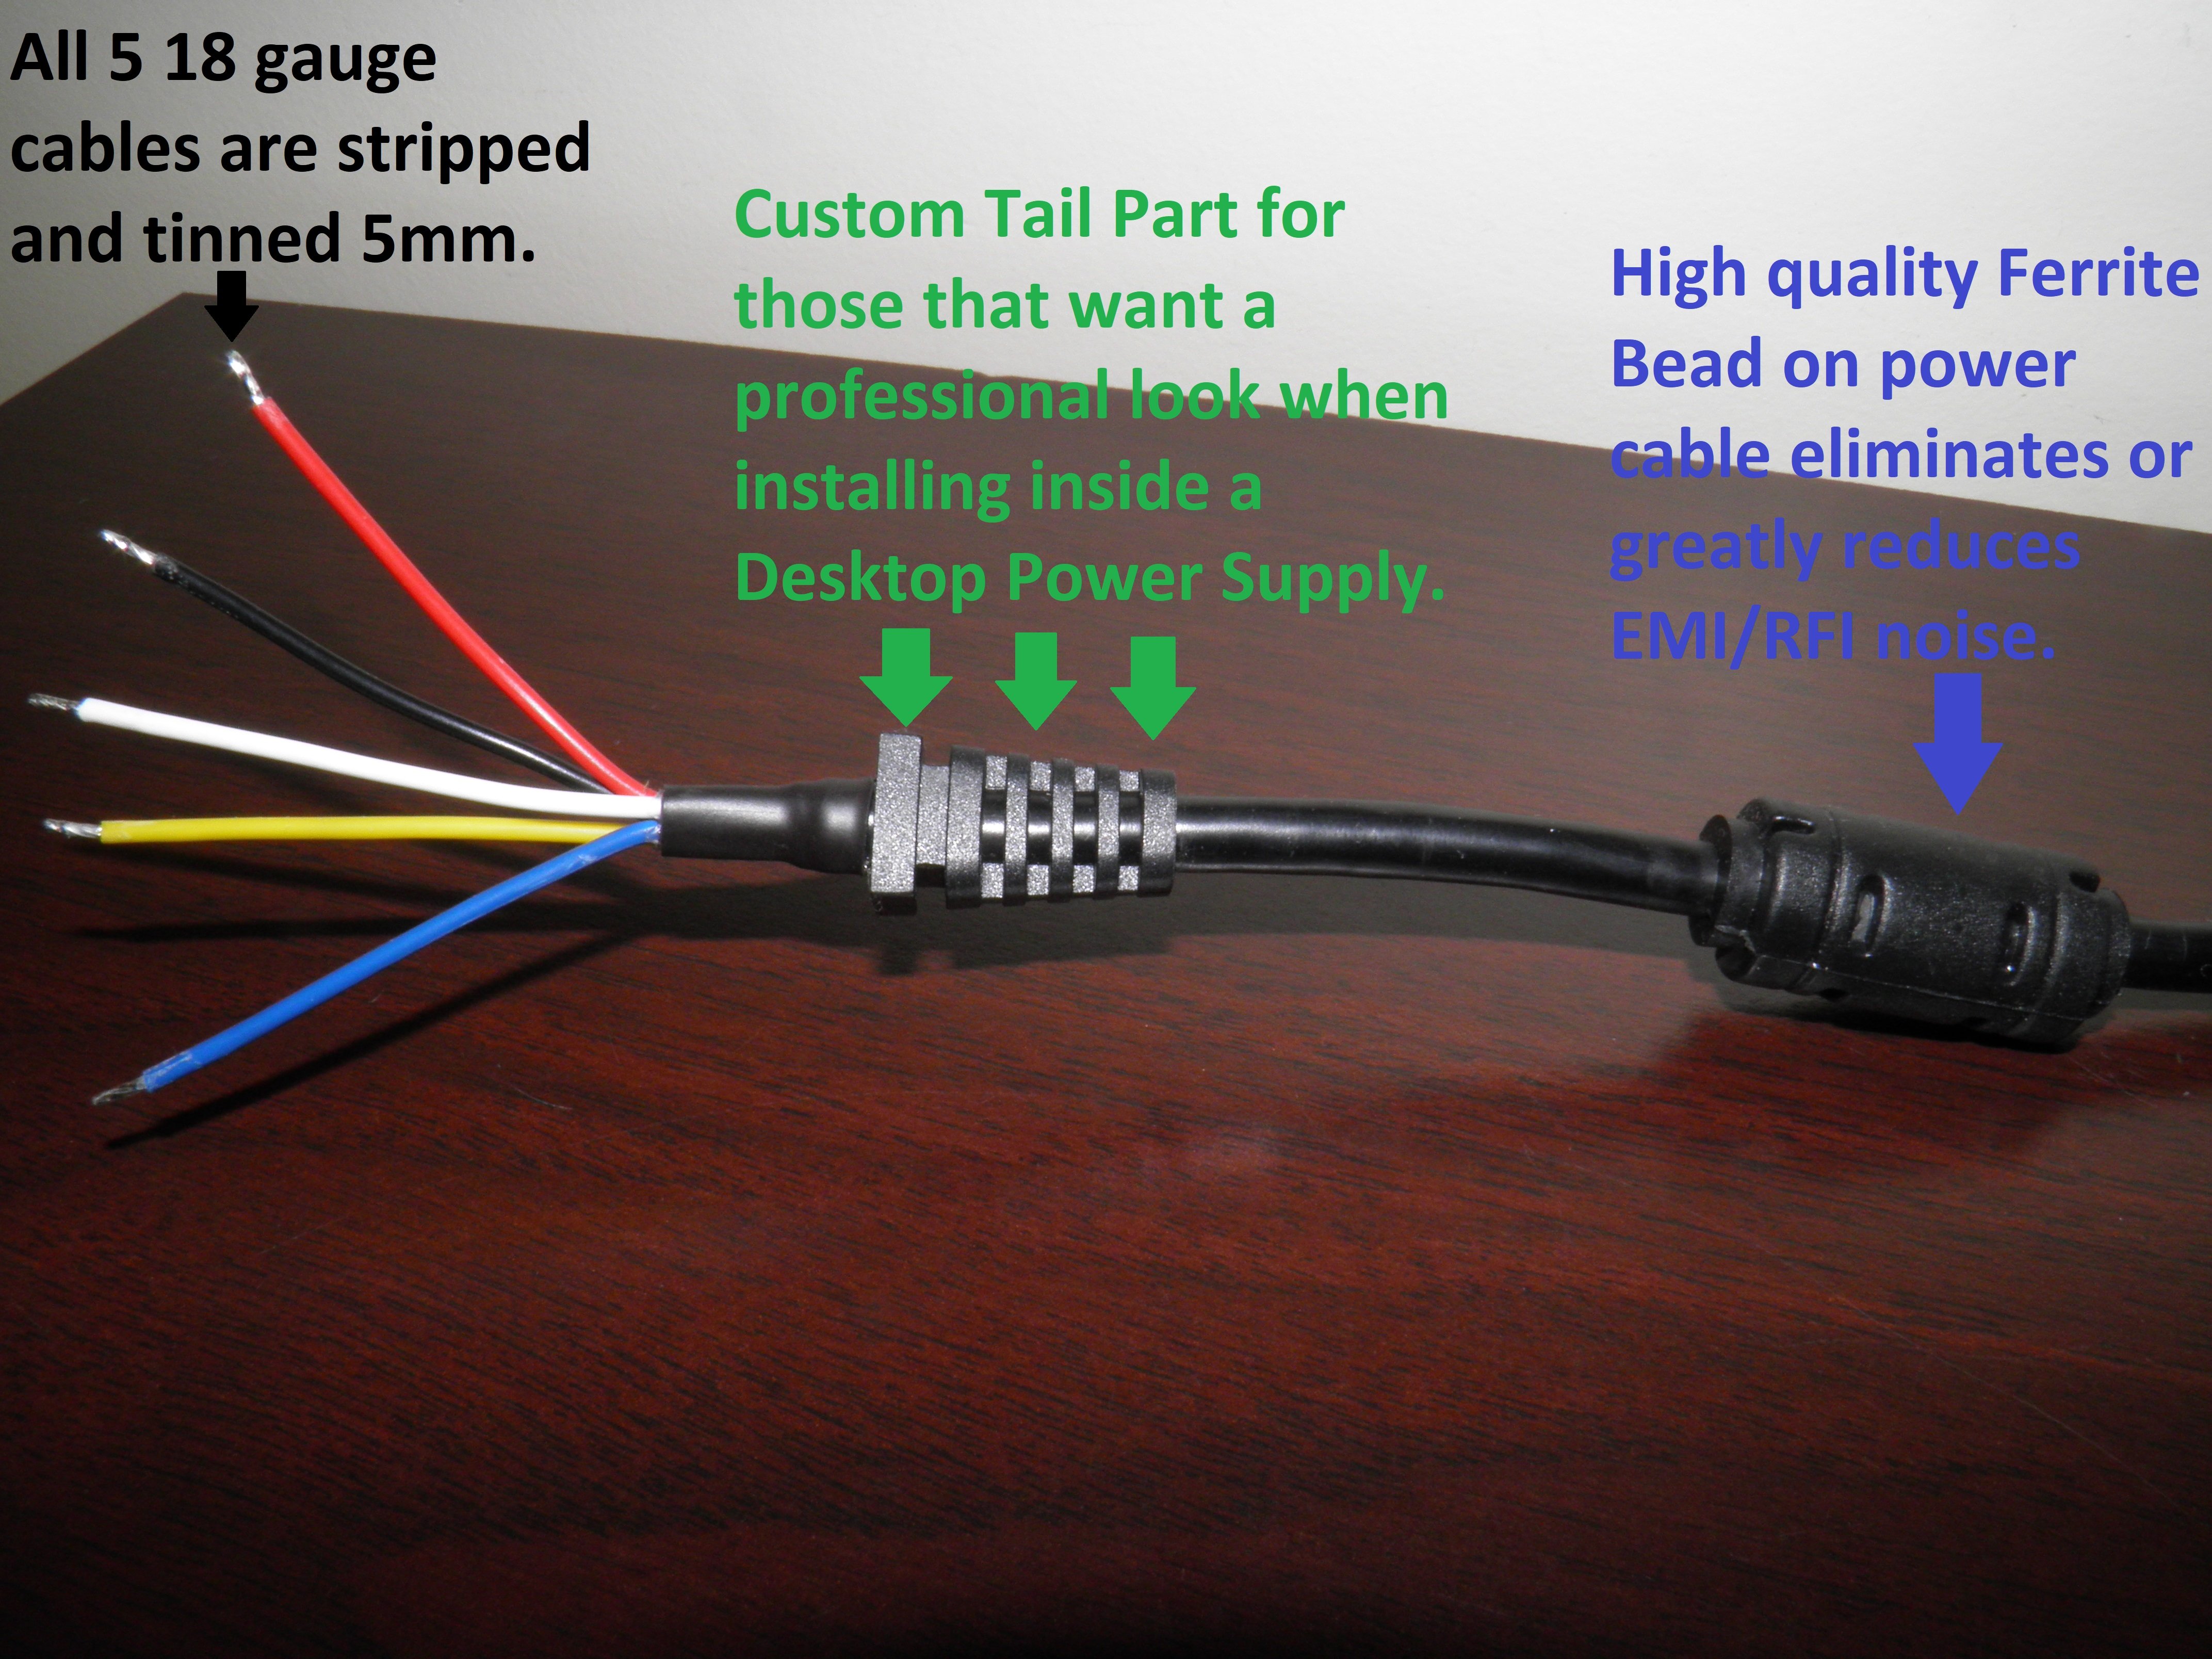 How to make a worldwide ColecoVision power supply for around $30-$40+ (some  may be able to make one for under $30 if they have spare parts laying  around). - ColecoVision / Adam - AtariAge Forums  Diy Xbox One Power Supply Wiring Diagram    AtariAge